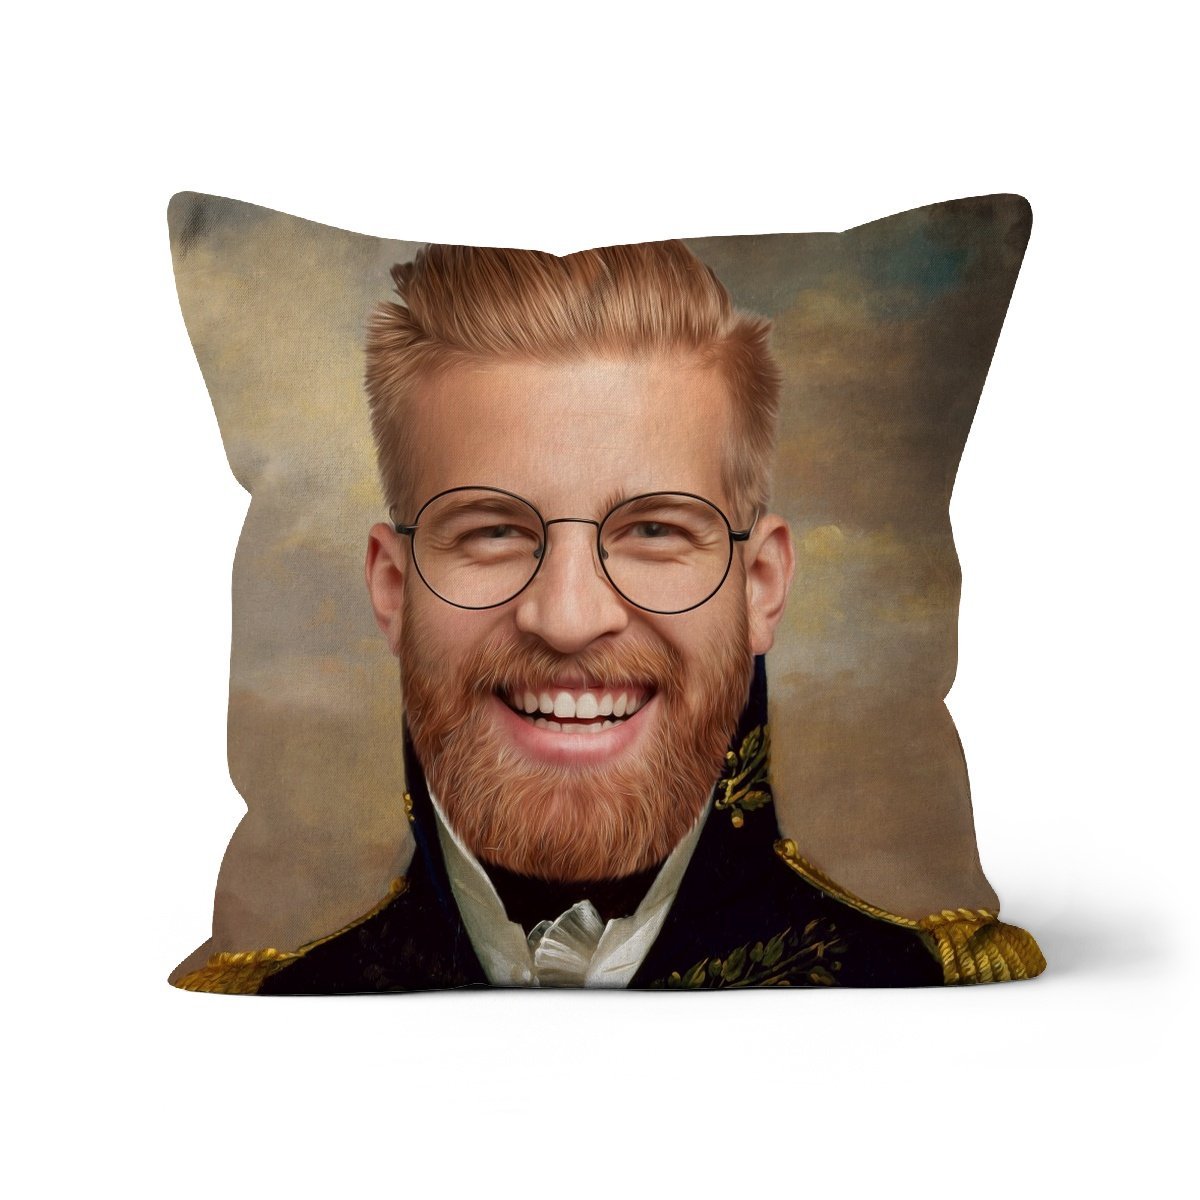 The General: Custom Male Throw Pillow - Paw & Glory - #pet portraits# - #dog portraits# - #pet portraits uk#paw and glory, pet portraits cushion,pillows of your dog, pillow with pet picture, print pet on pillow, pet face pillow, pup pillows